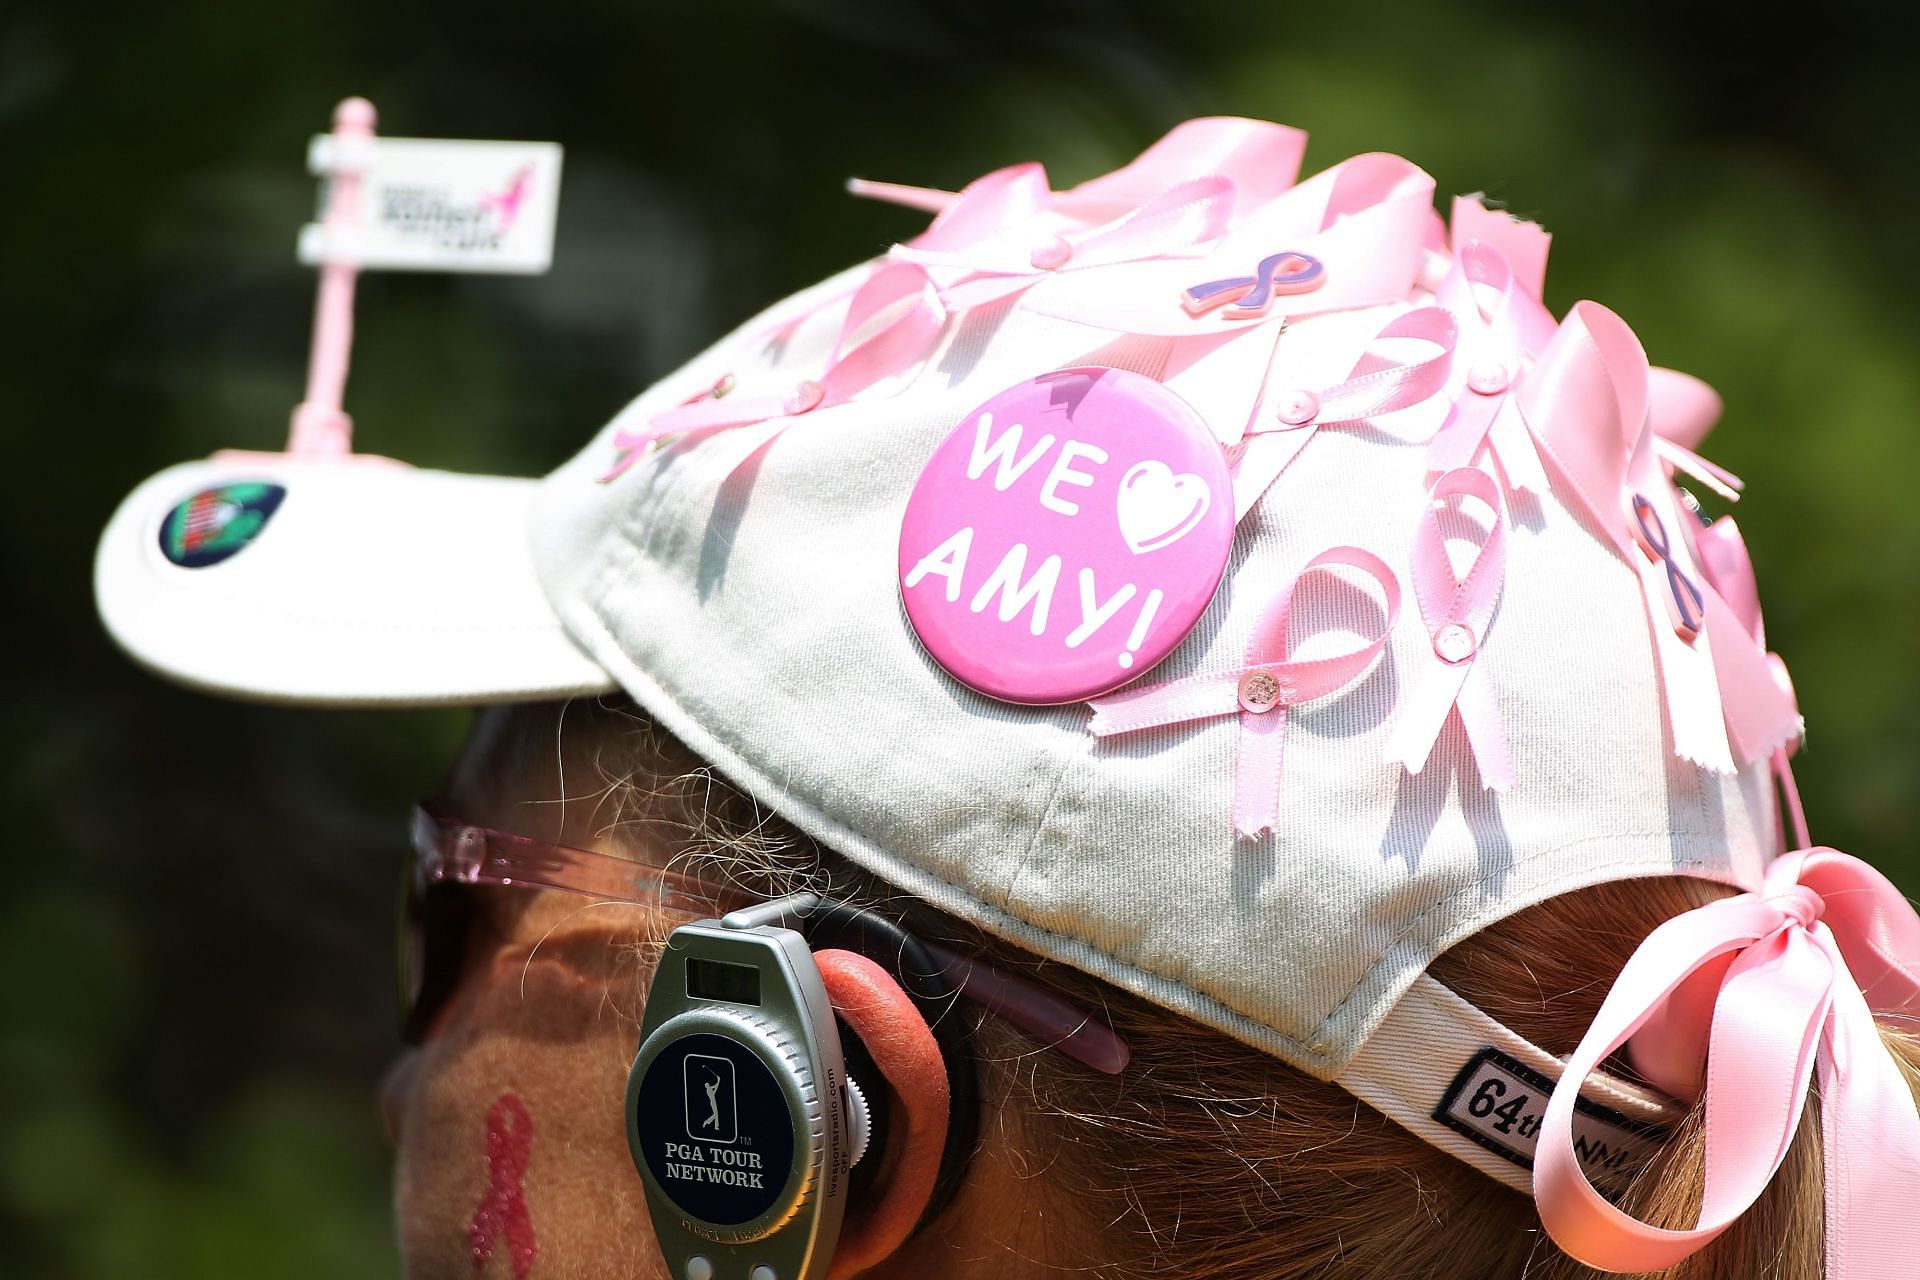 Fan supporting Amy Mickelson, Crowne Plaza Invitational 2010 (Image via Getty)